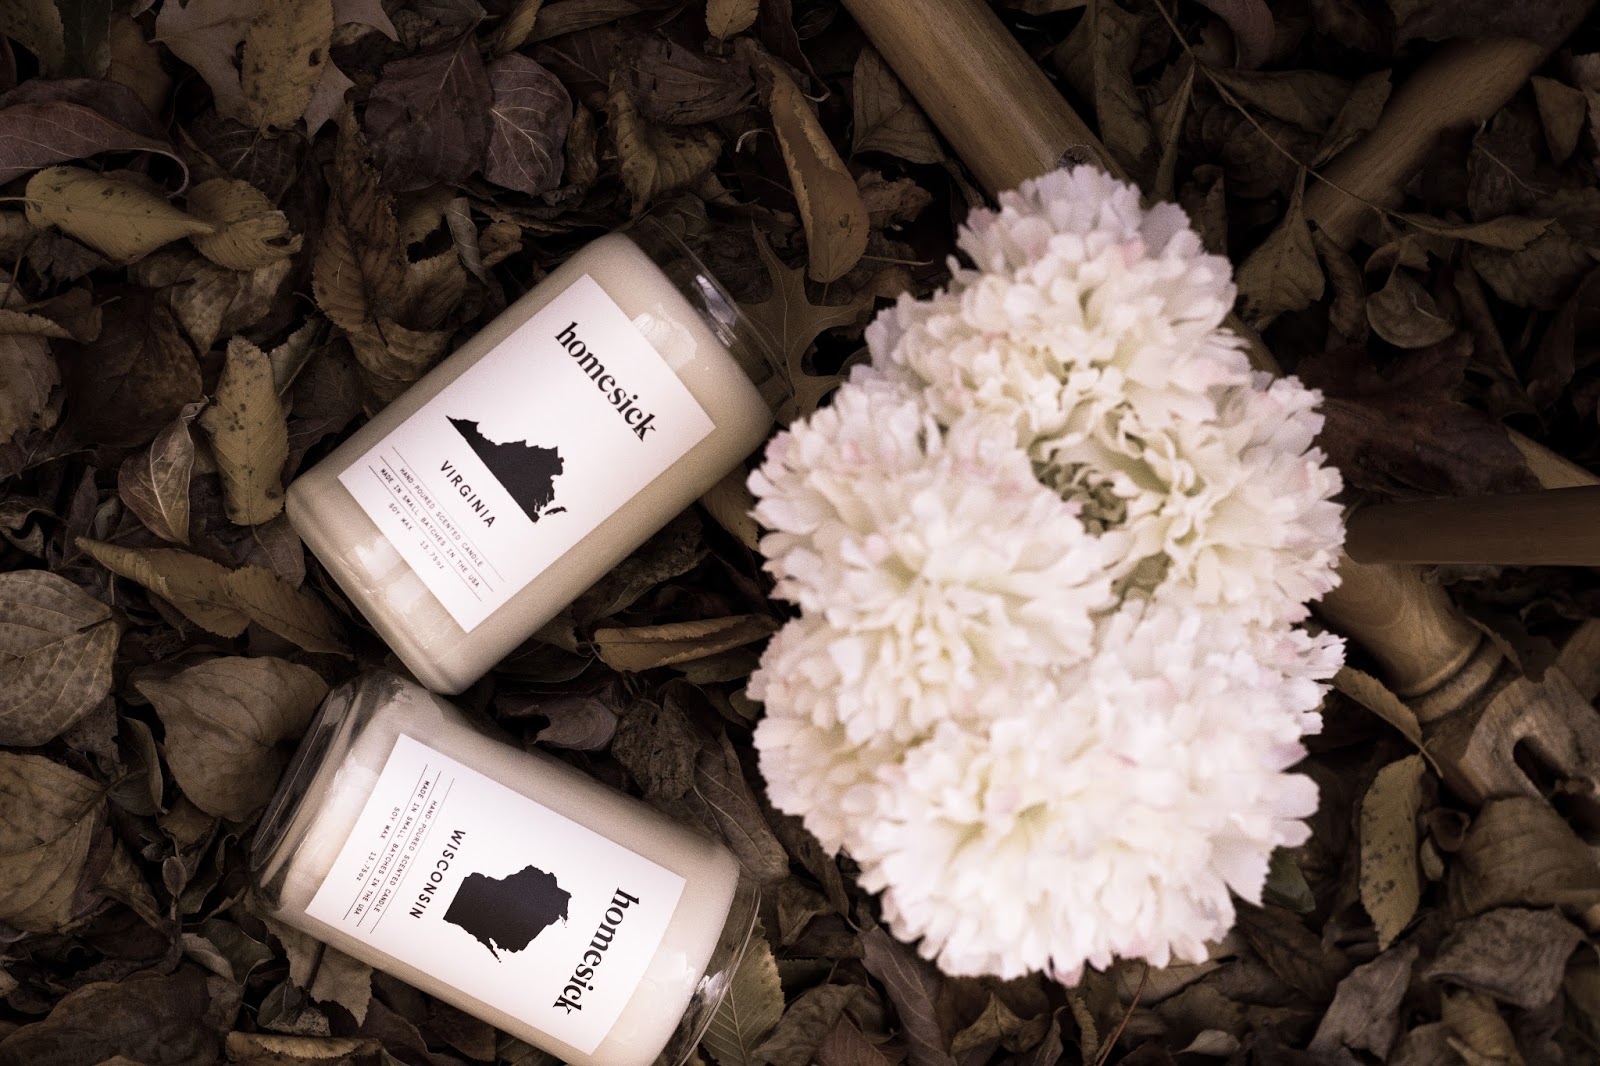 THIS CANDLE FRAGRANCE WILL BRING YOUR FAVORITE CITIES TO YOU